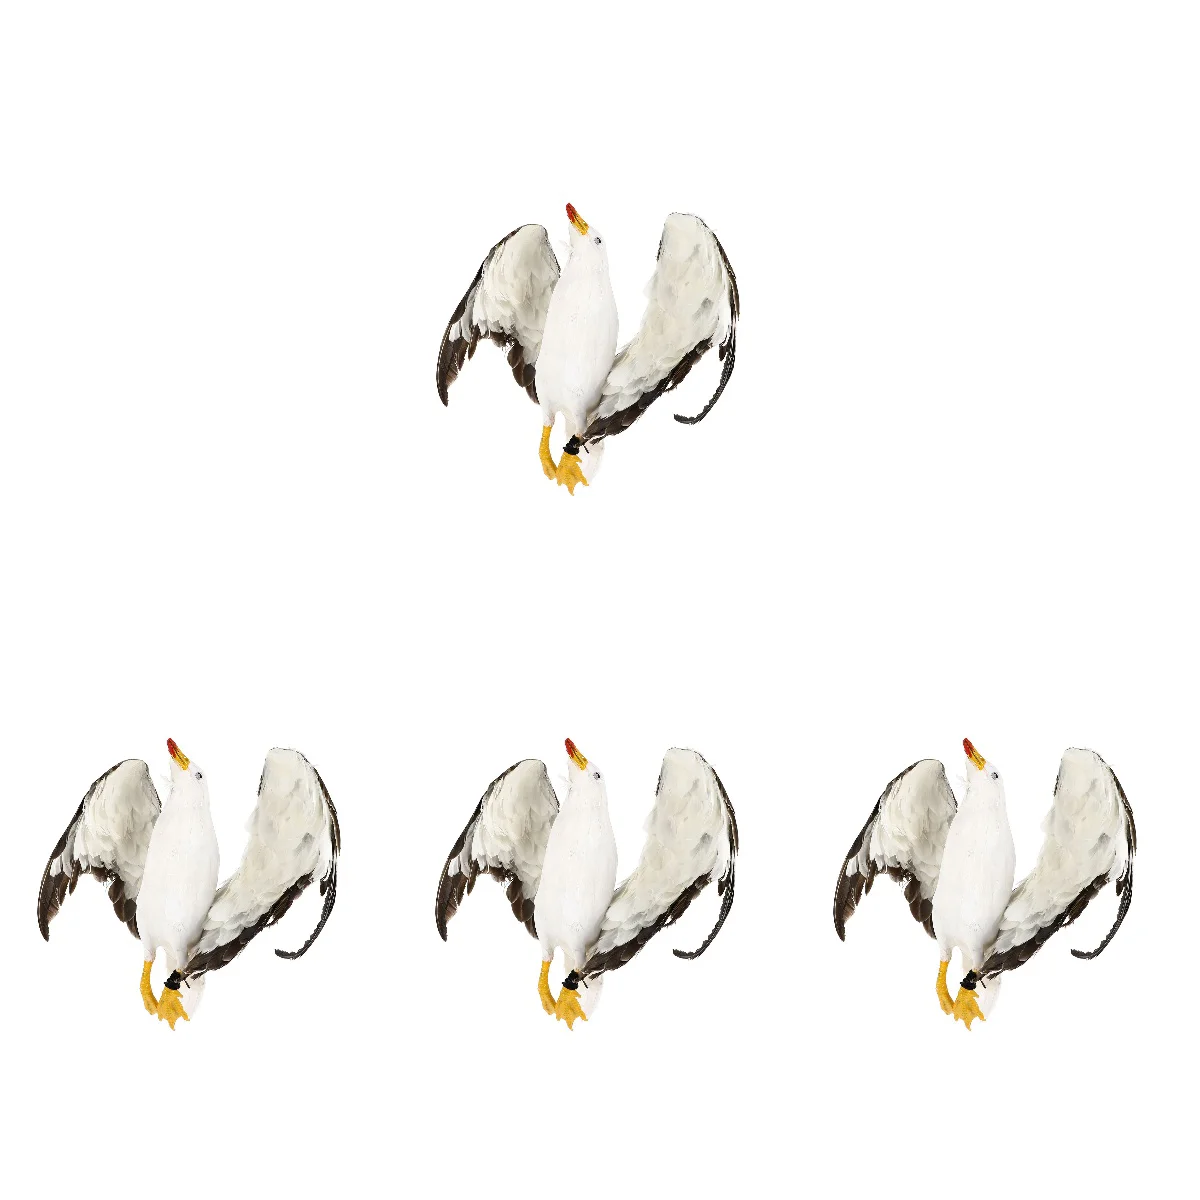 

4 Pcs Simulated Dead Seagull Fake Simulation Decorations Pendant Bird Real Ornament Practical